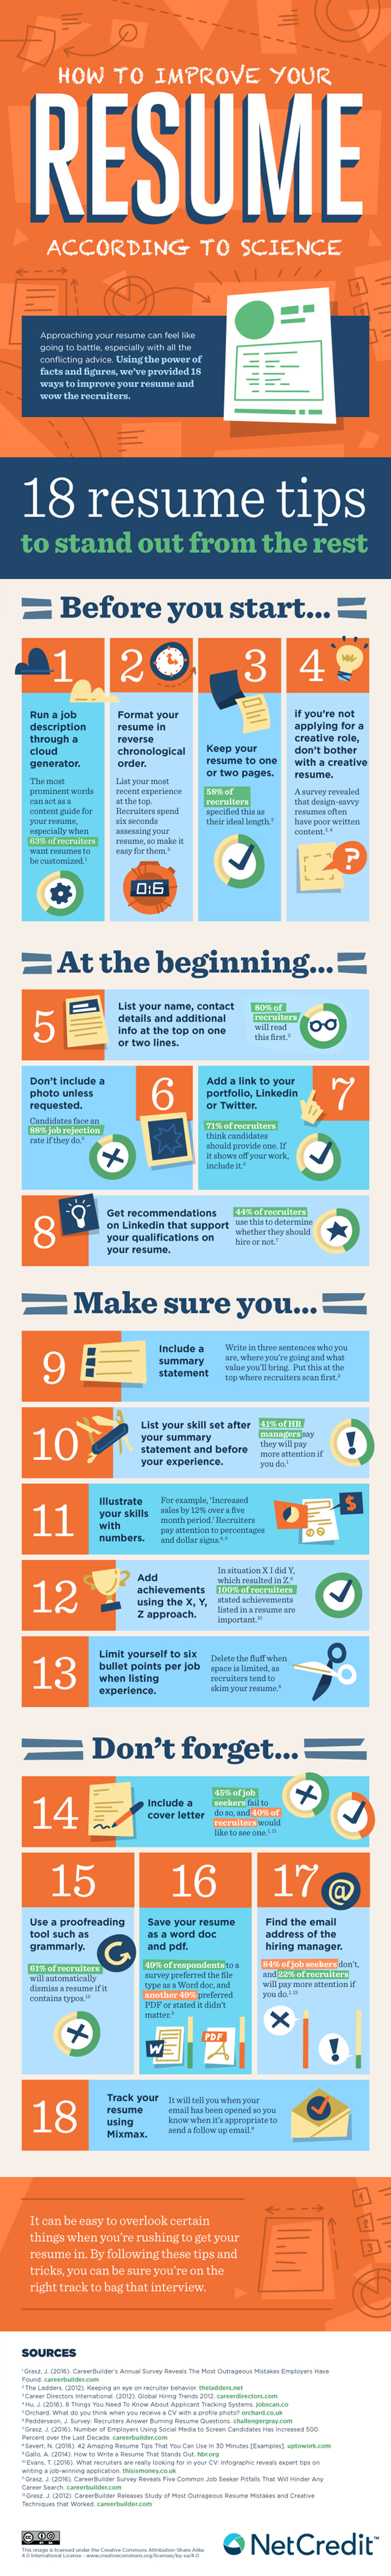 Tips on Writing a Professional Resume Infographic